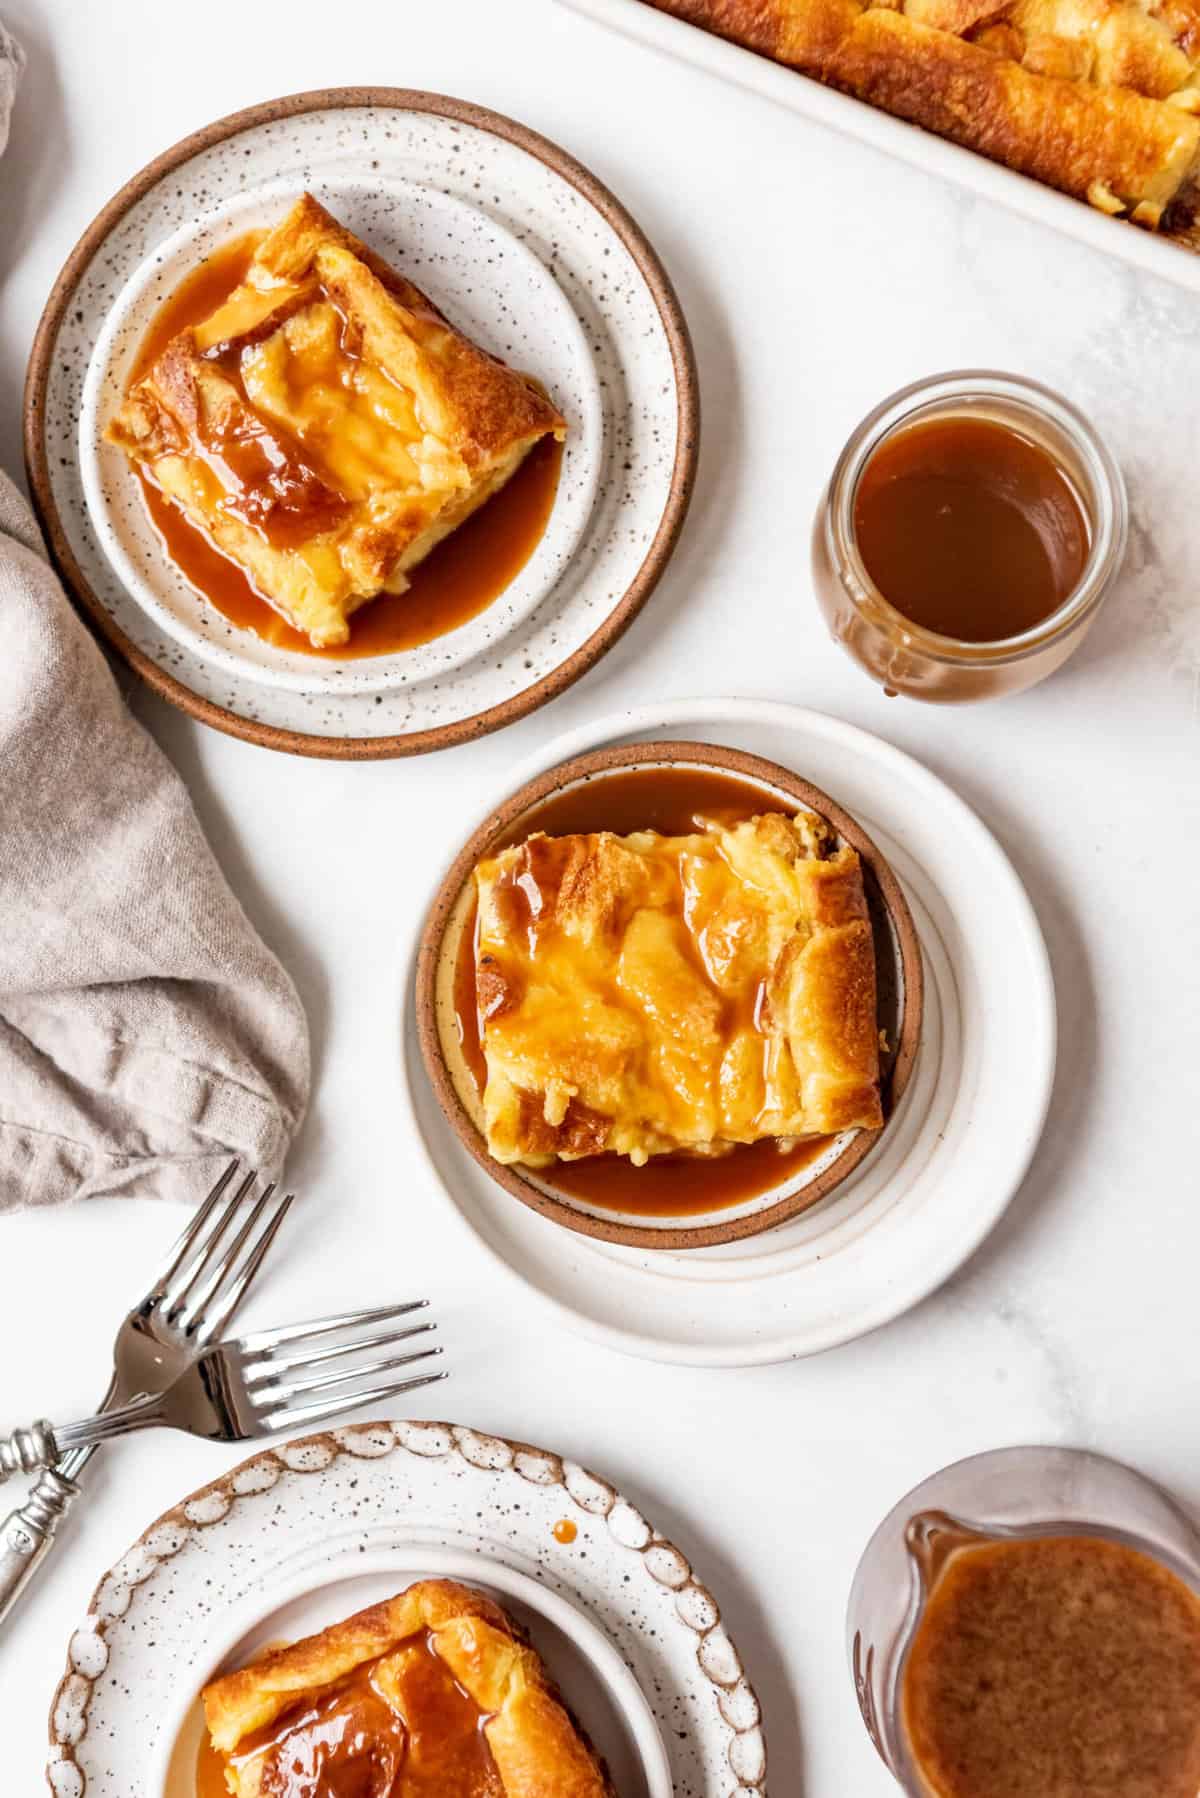 An overhead image of slices of bread pudding on plates with caramel sauce.